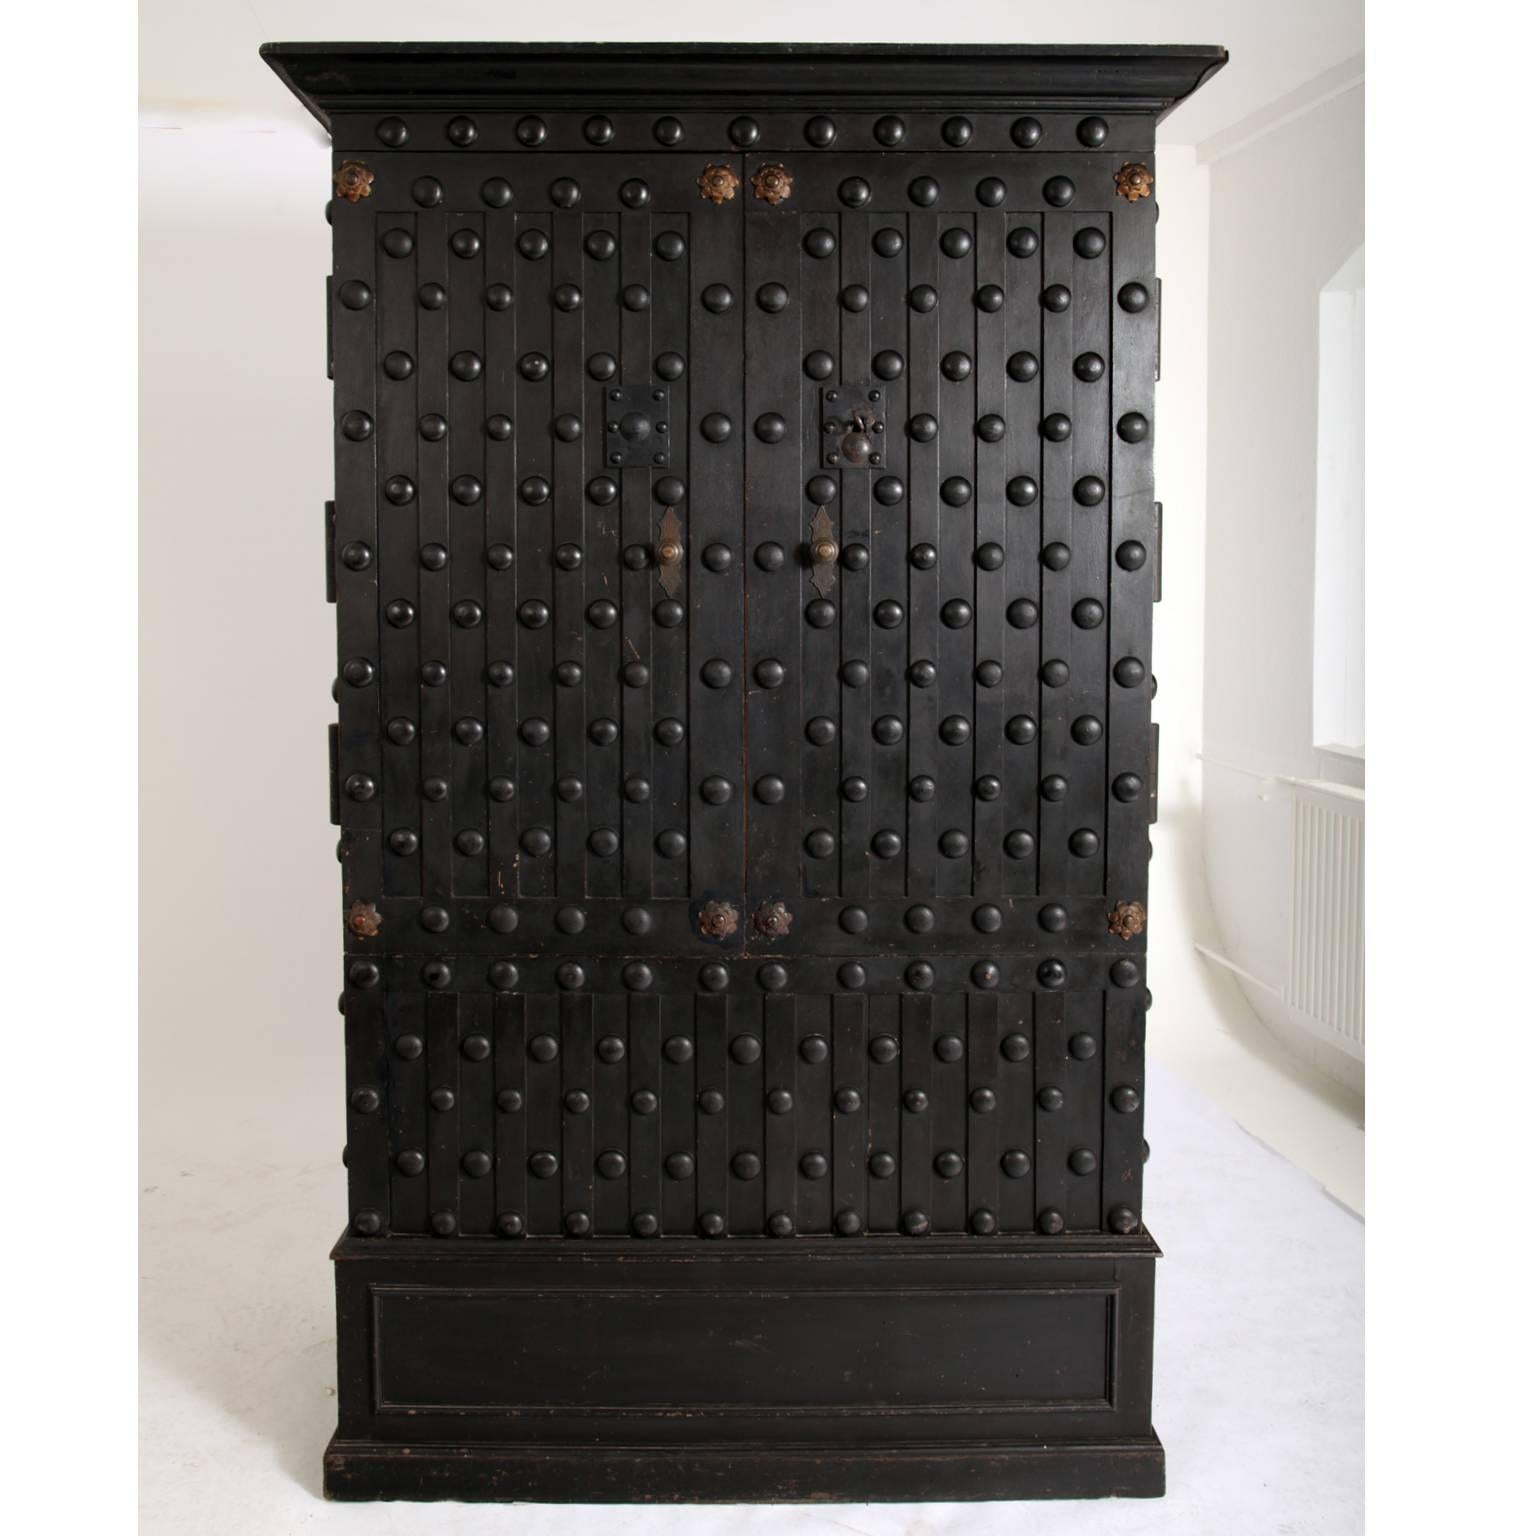 Unusual safe cabinet out of solid walnut with a slightly protruding cornice and a coffered base. The body is covered with wooden rivets that simulate the look of metal safes. Behind the doors are fourteen drawers and a large trunk compartment. The